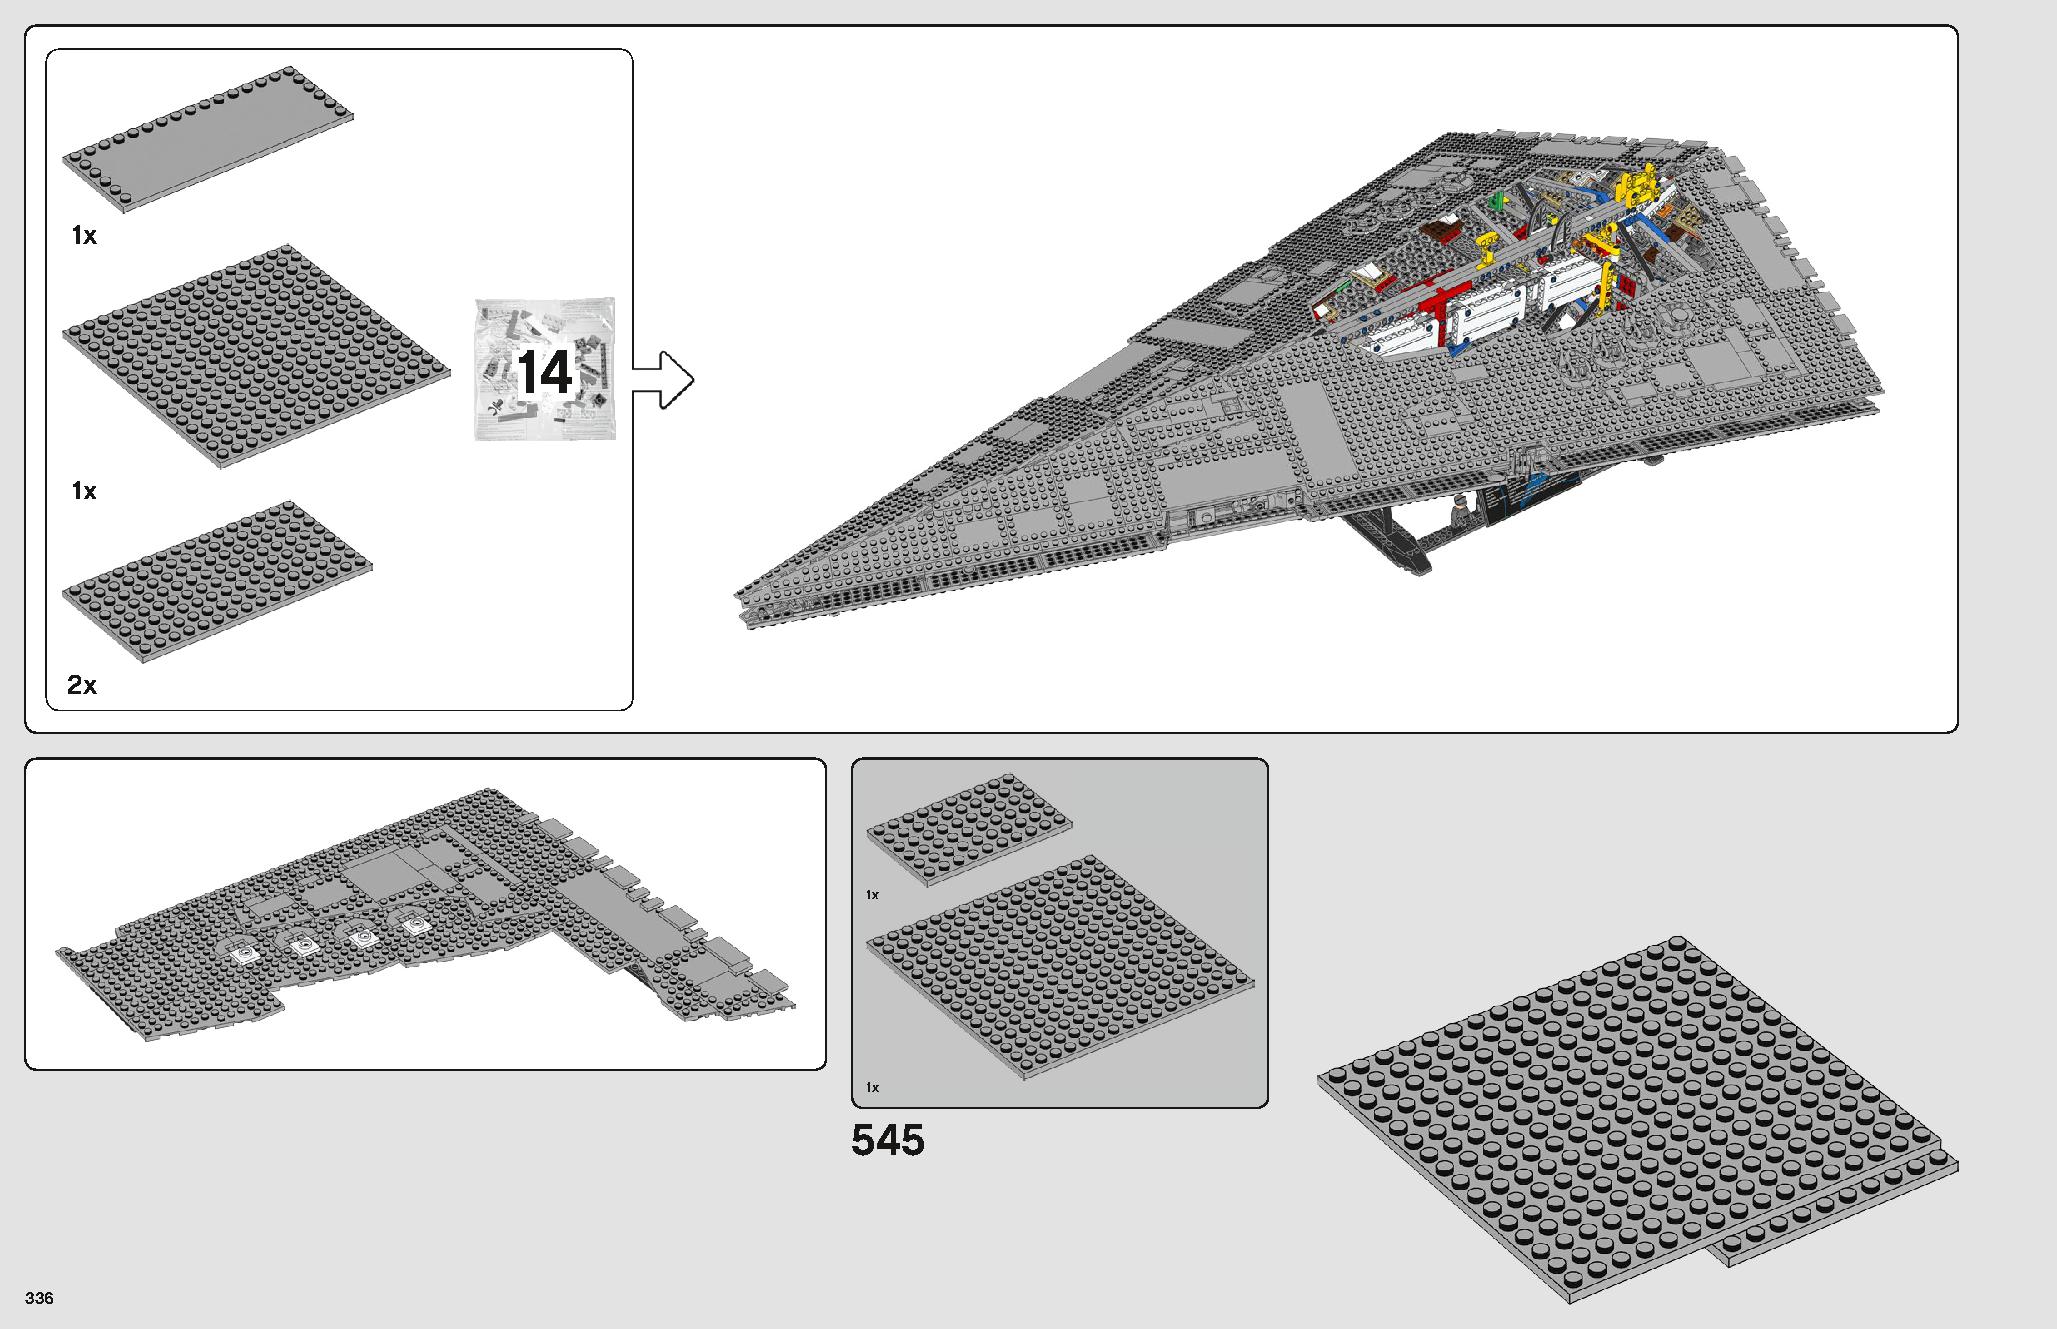 Imperial Star Destroyer 75252 LEGO information LEGO instructions 336 page